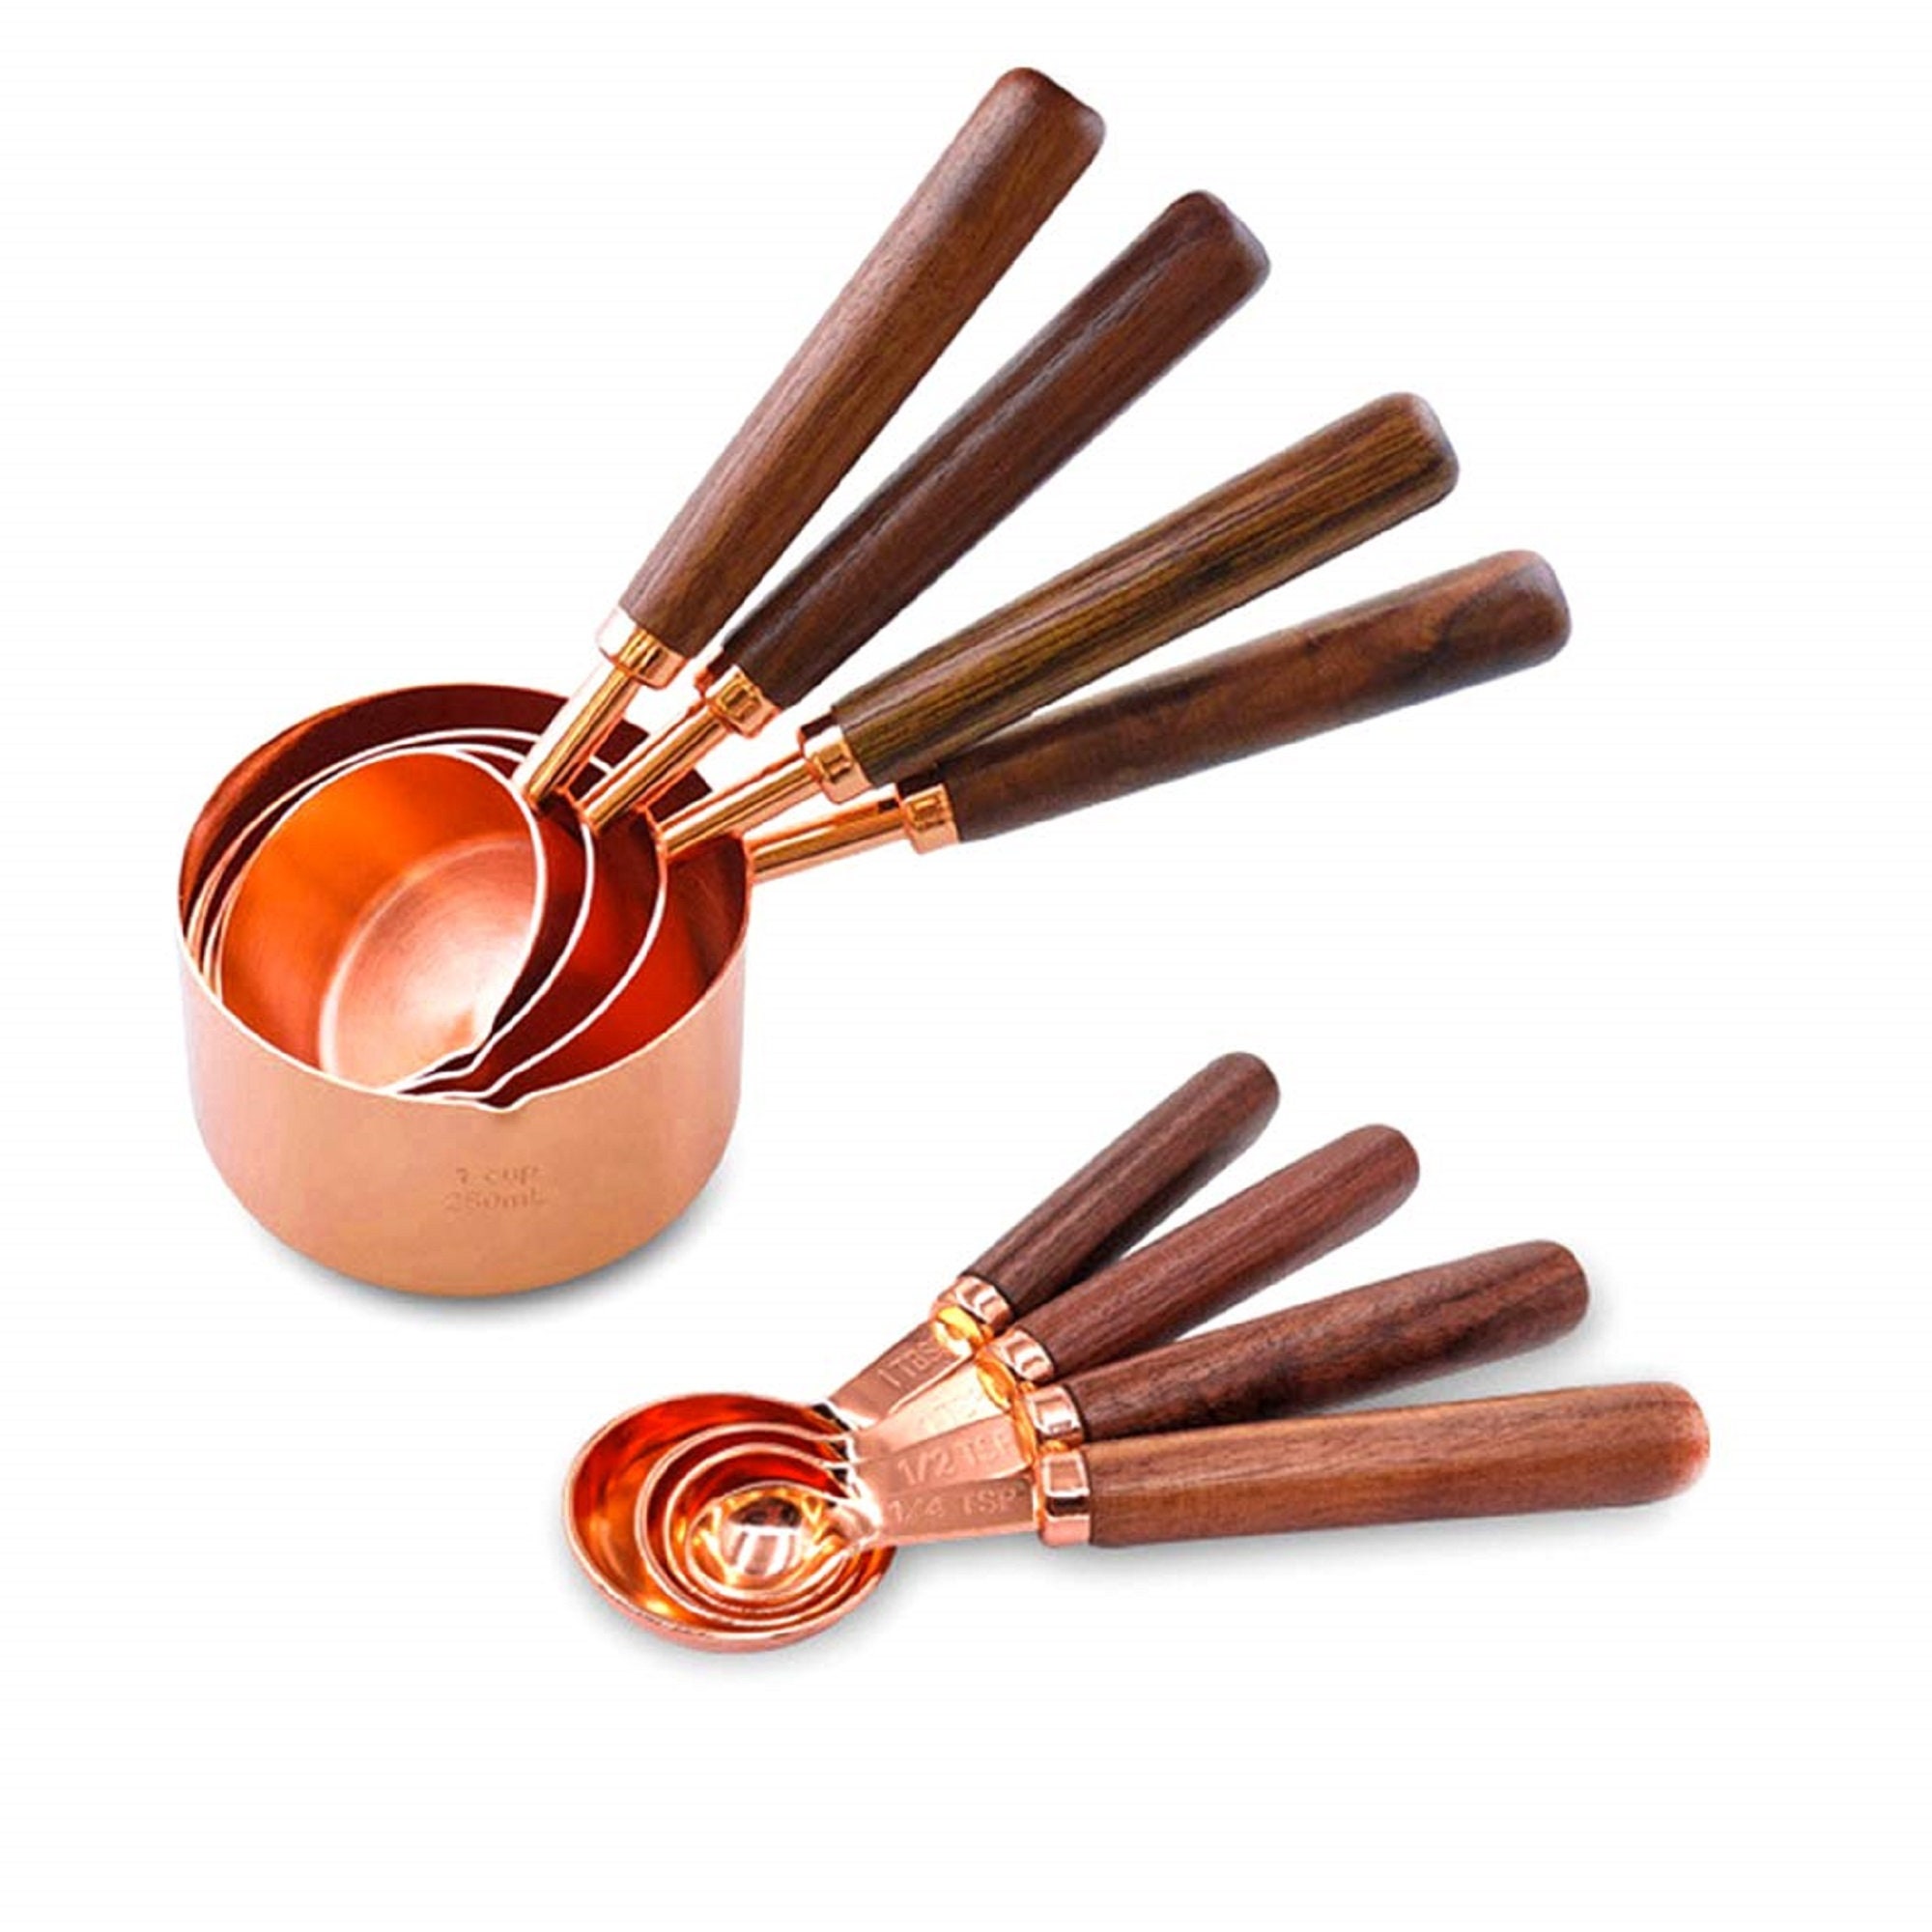 Copper Measuring Cups and Spoons Set